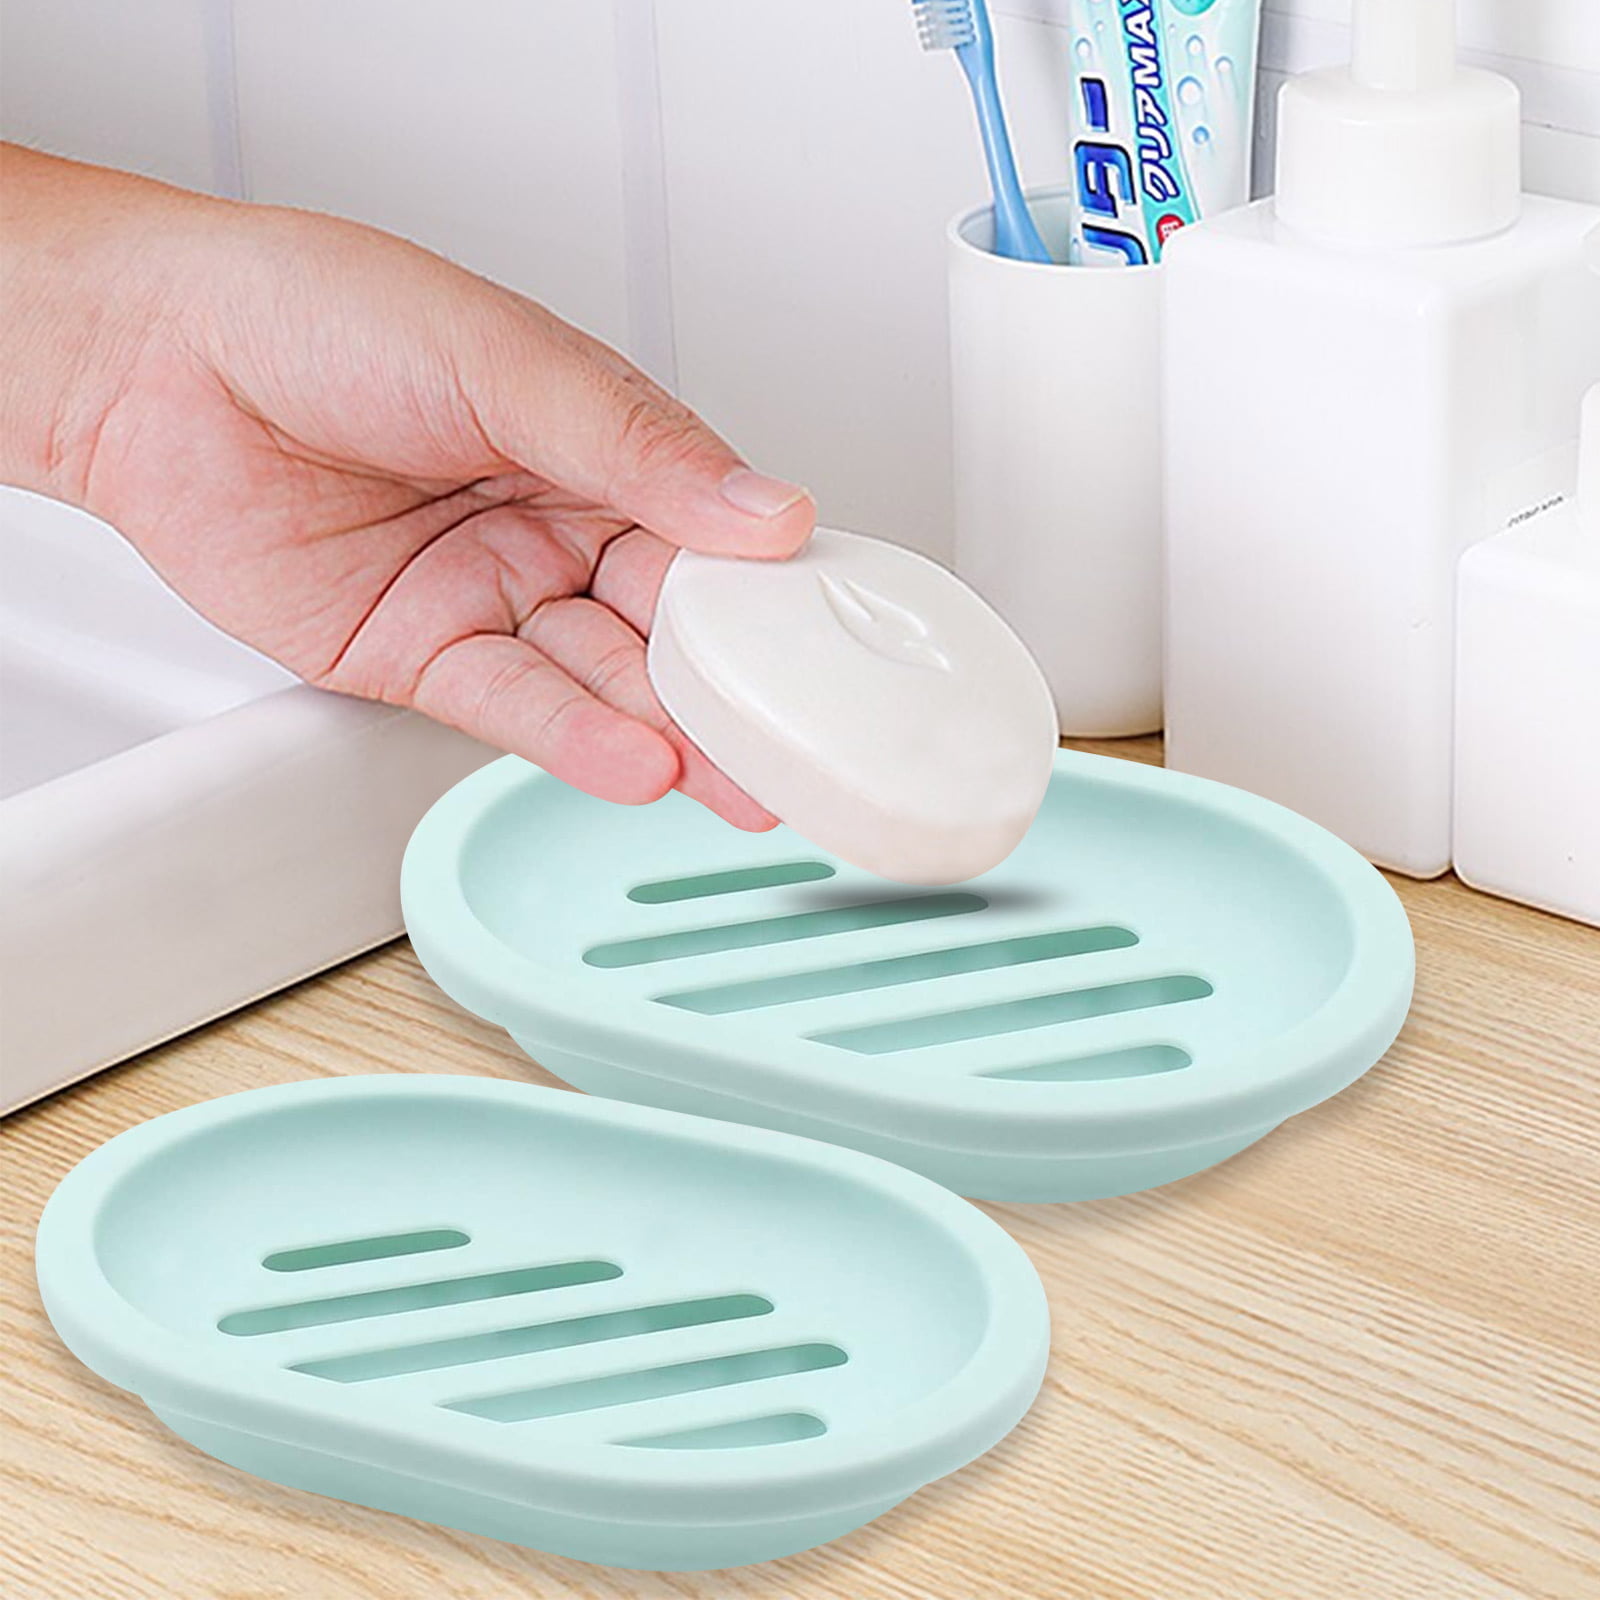 Dry, 2-Pack Soap Holder Dish with Drain Soap Holder,Soap Saver Easy Cleaning